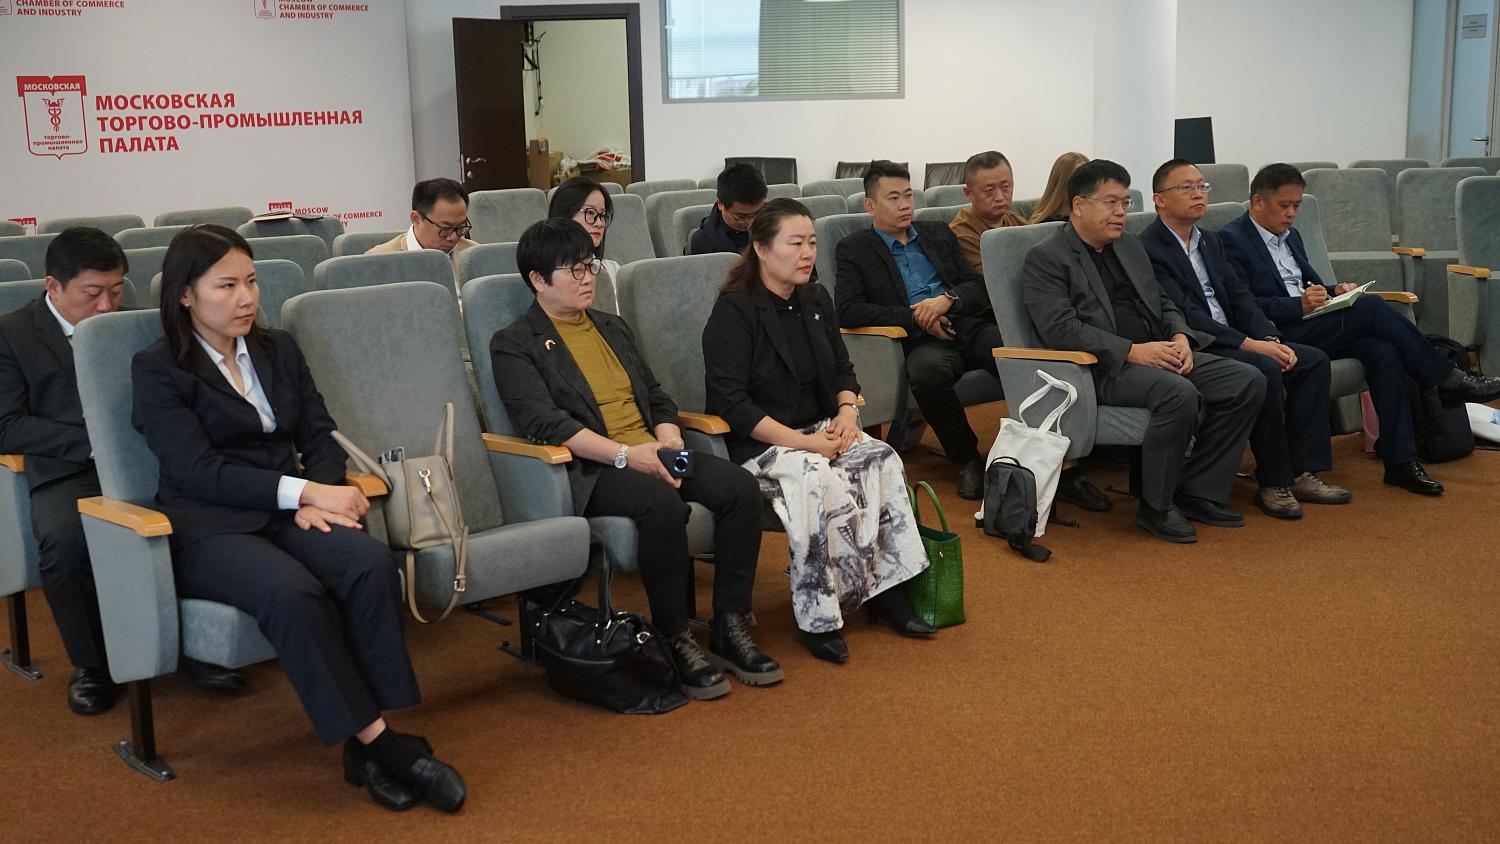 The Moscow Chamber of Commerce and Industry was visited by a delegation from the Shandong Province (PRC)